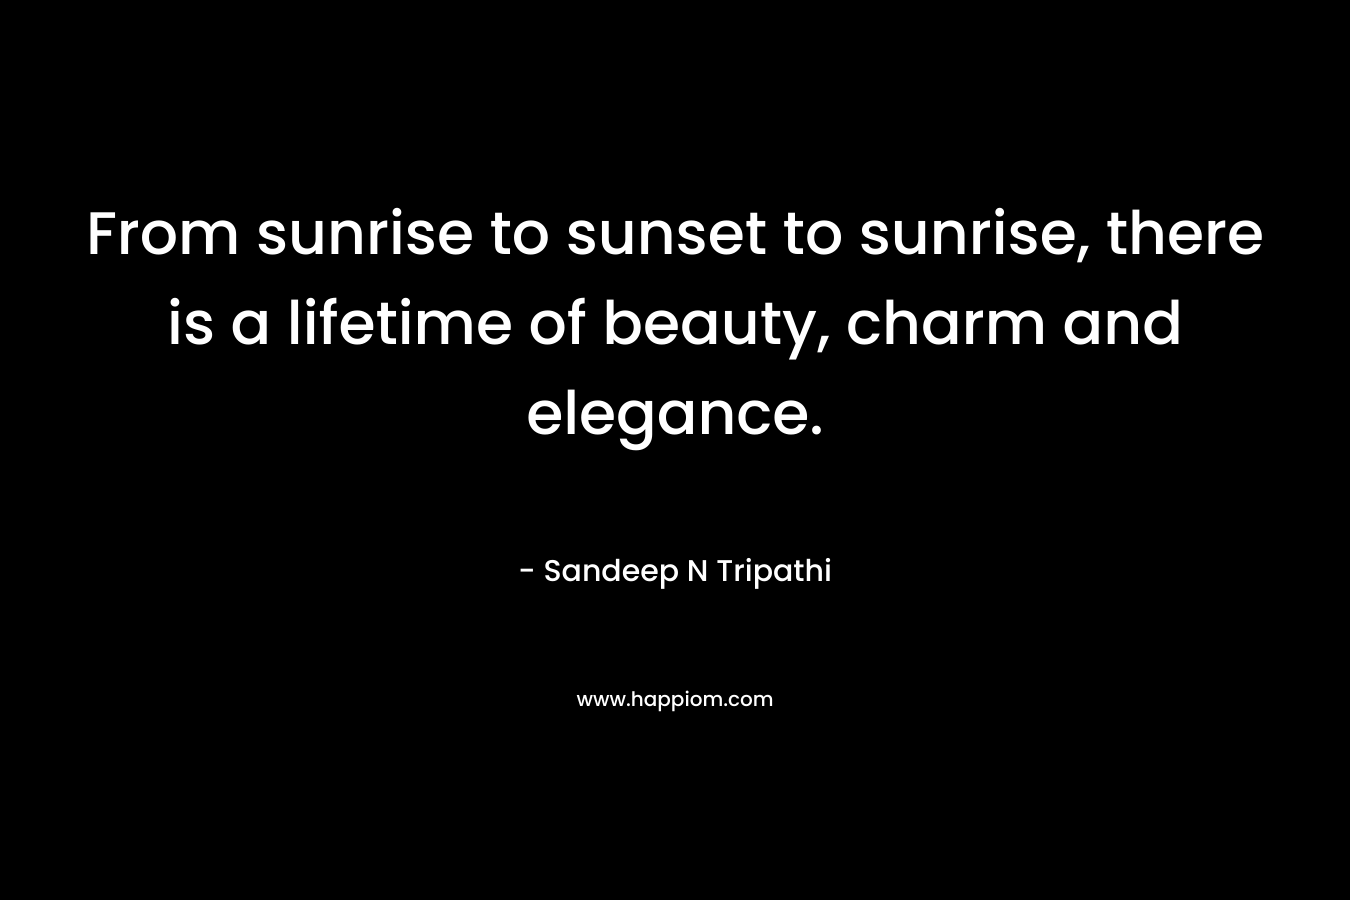 From sunrise to sunset to sunrise, there is a lifetime of beauty, charm and elegance. – Sandeep N Tripathi